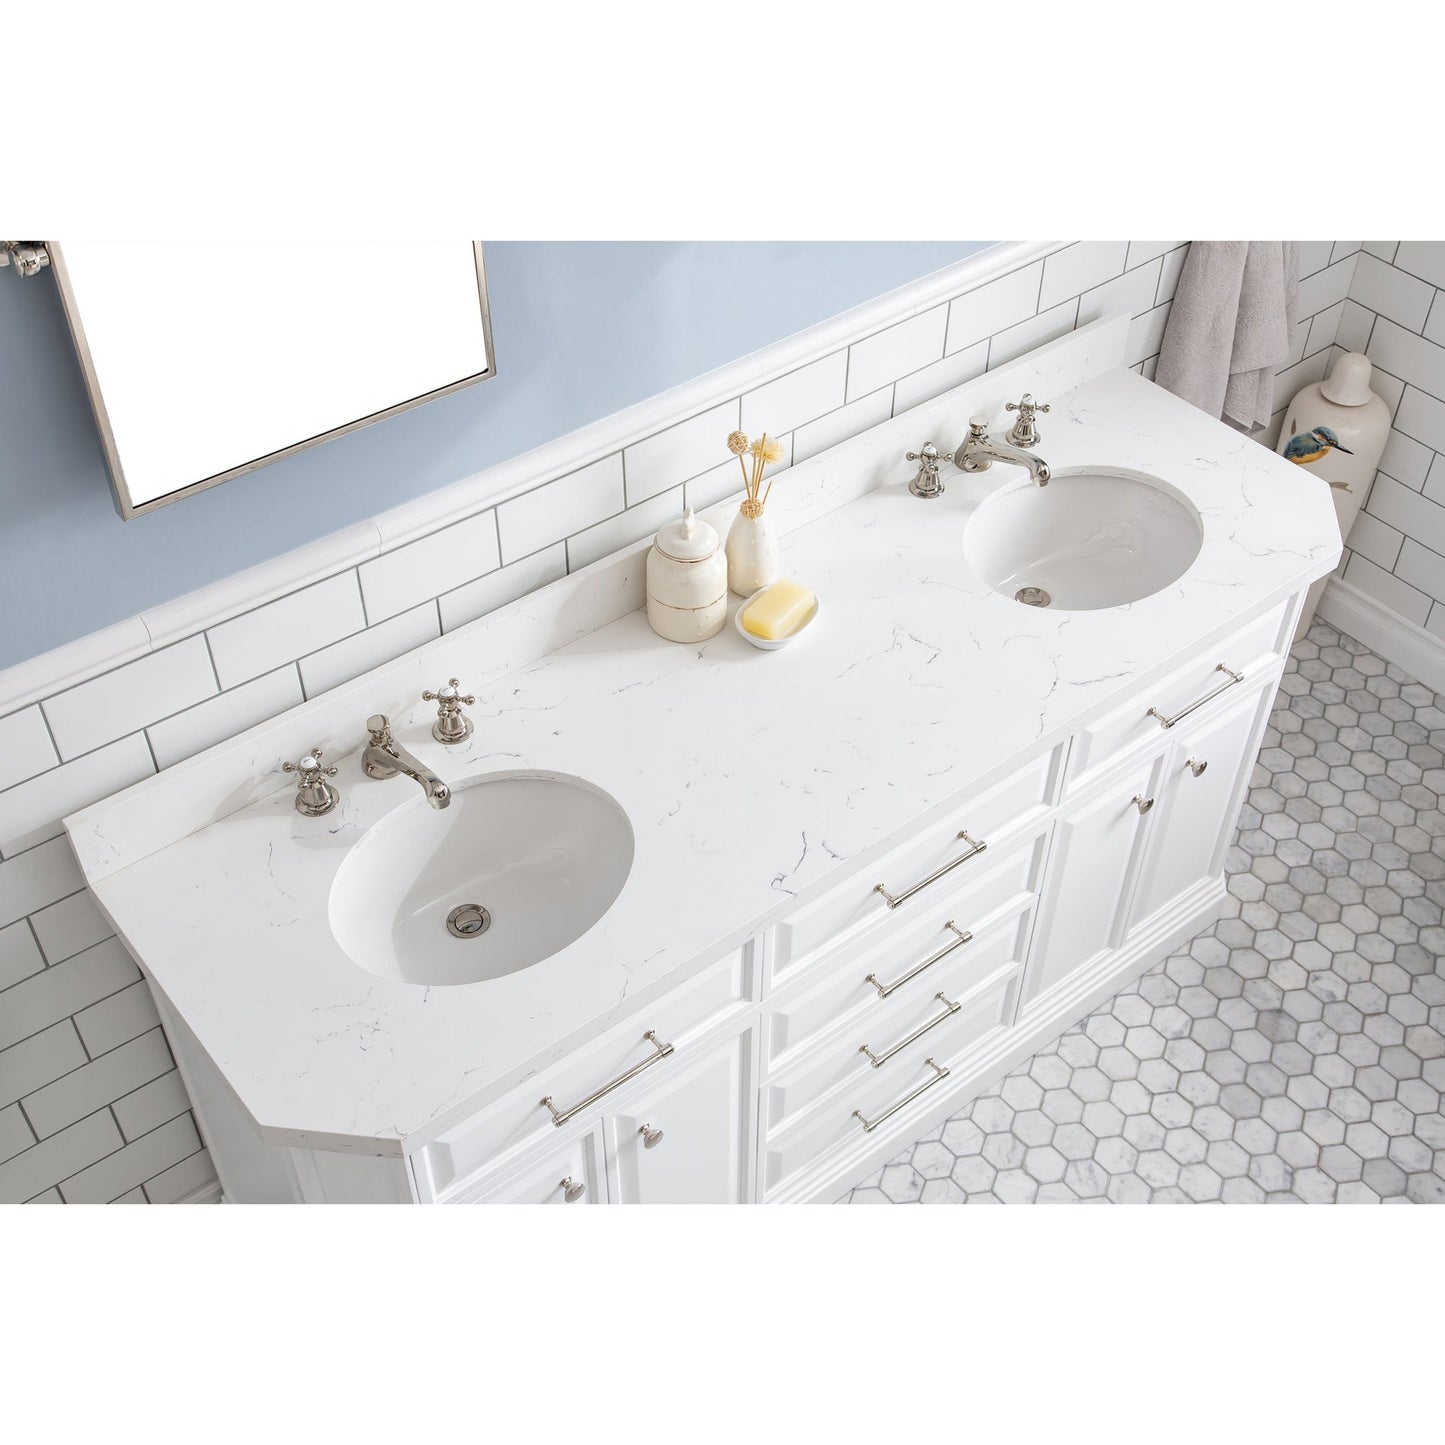 Water Creation Palace 72" Quartz Carrara Pure White Bathroom Vanity Set With Hardware And F2-0009 Faucets in Polished Nickel (PVD) Finish